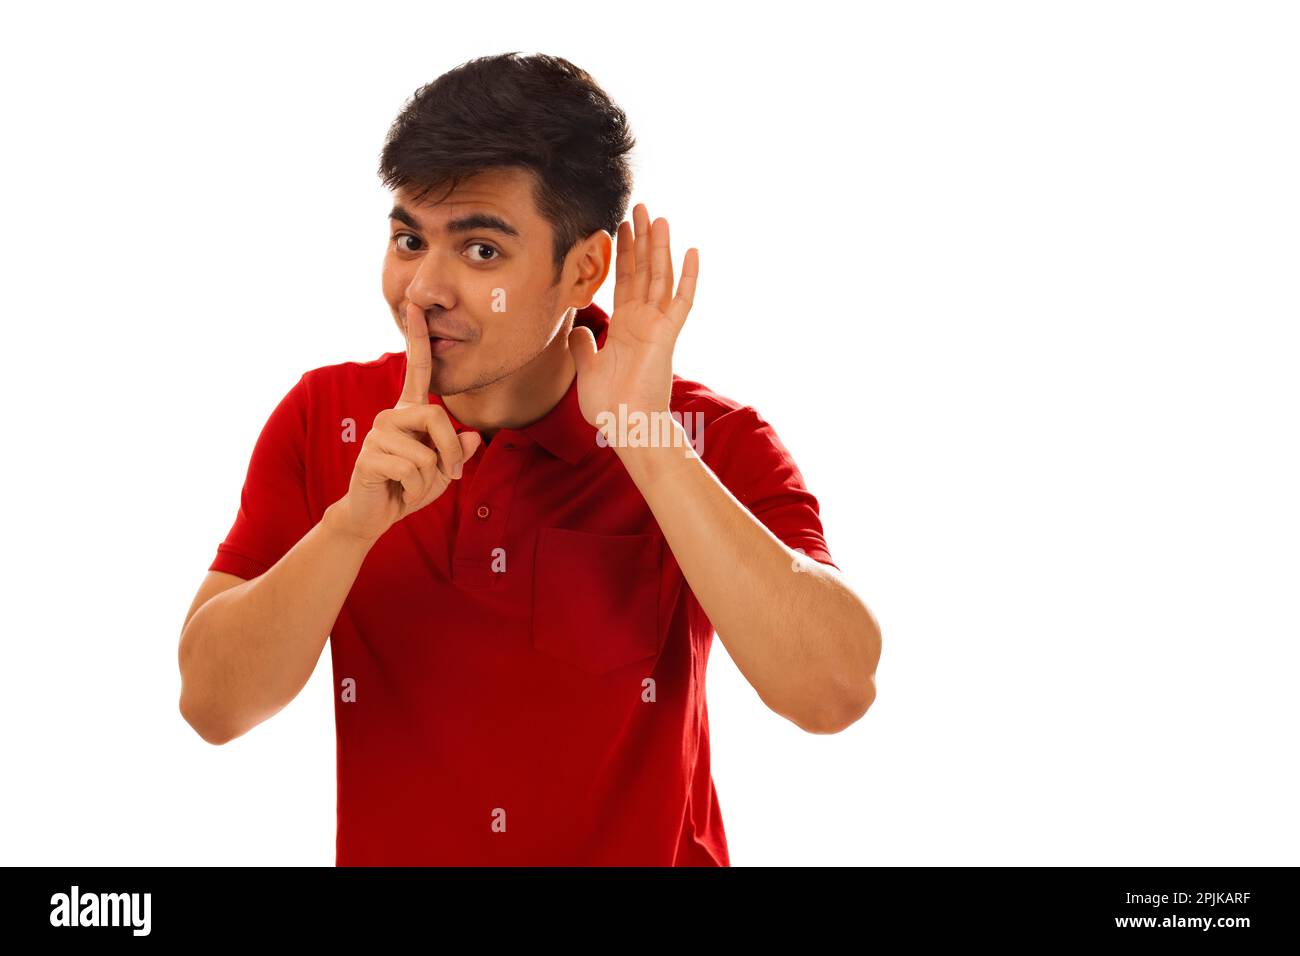 Portrait of young man showing hush gesture against white background Stock Photo